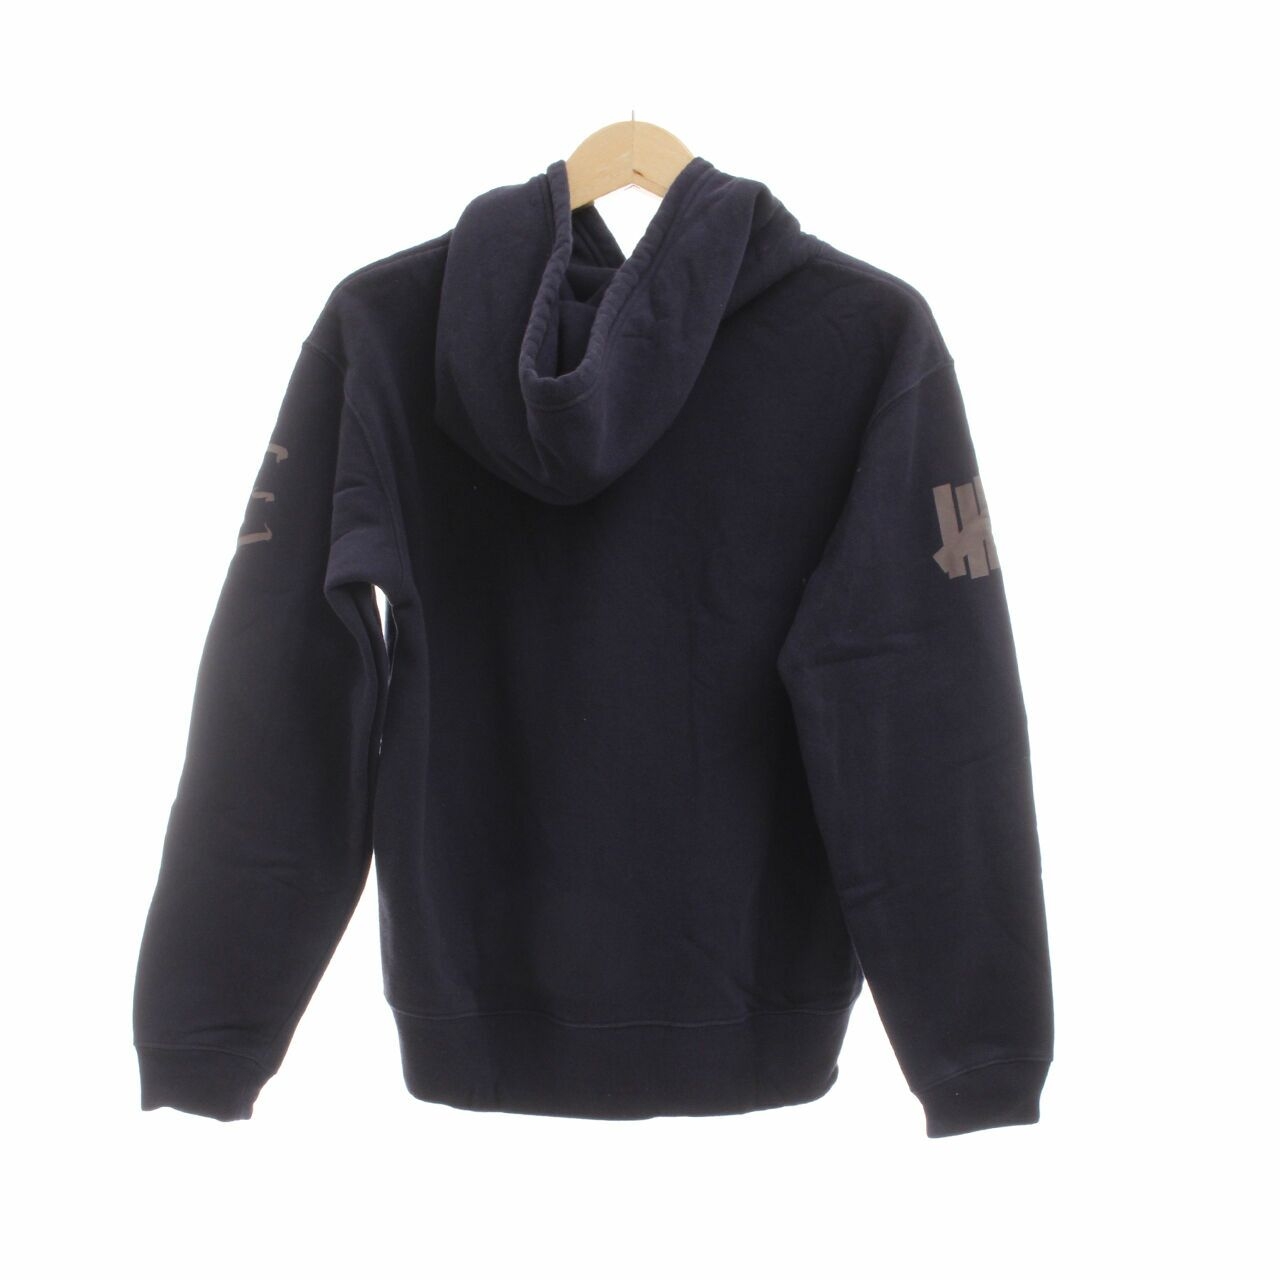 Undefeated Navy Sweater